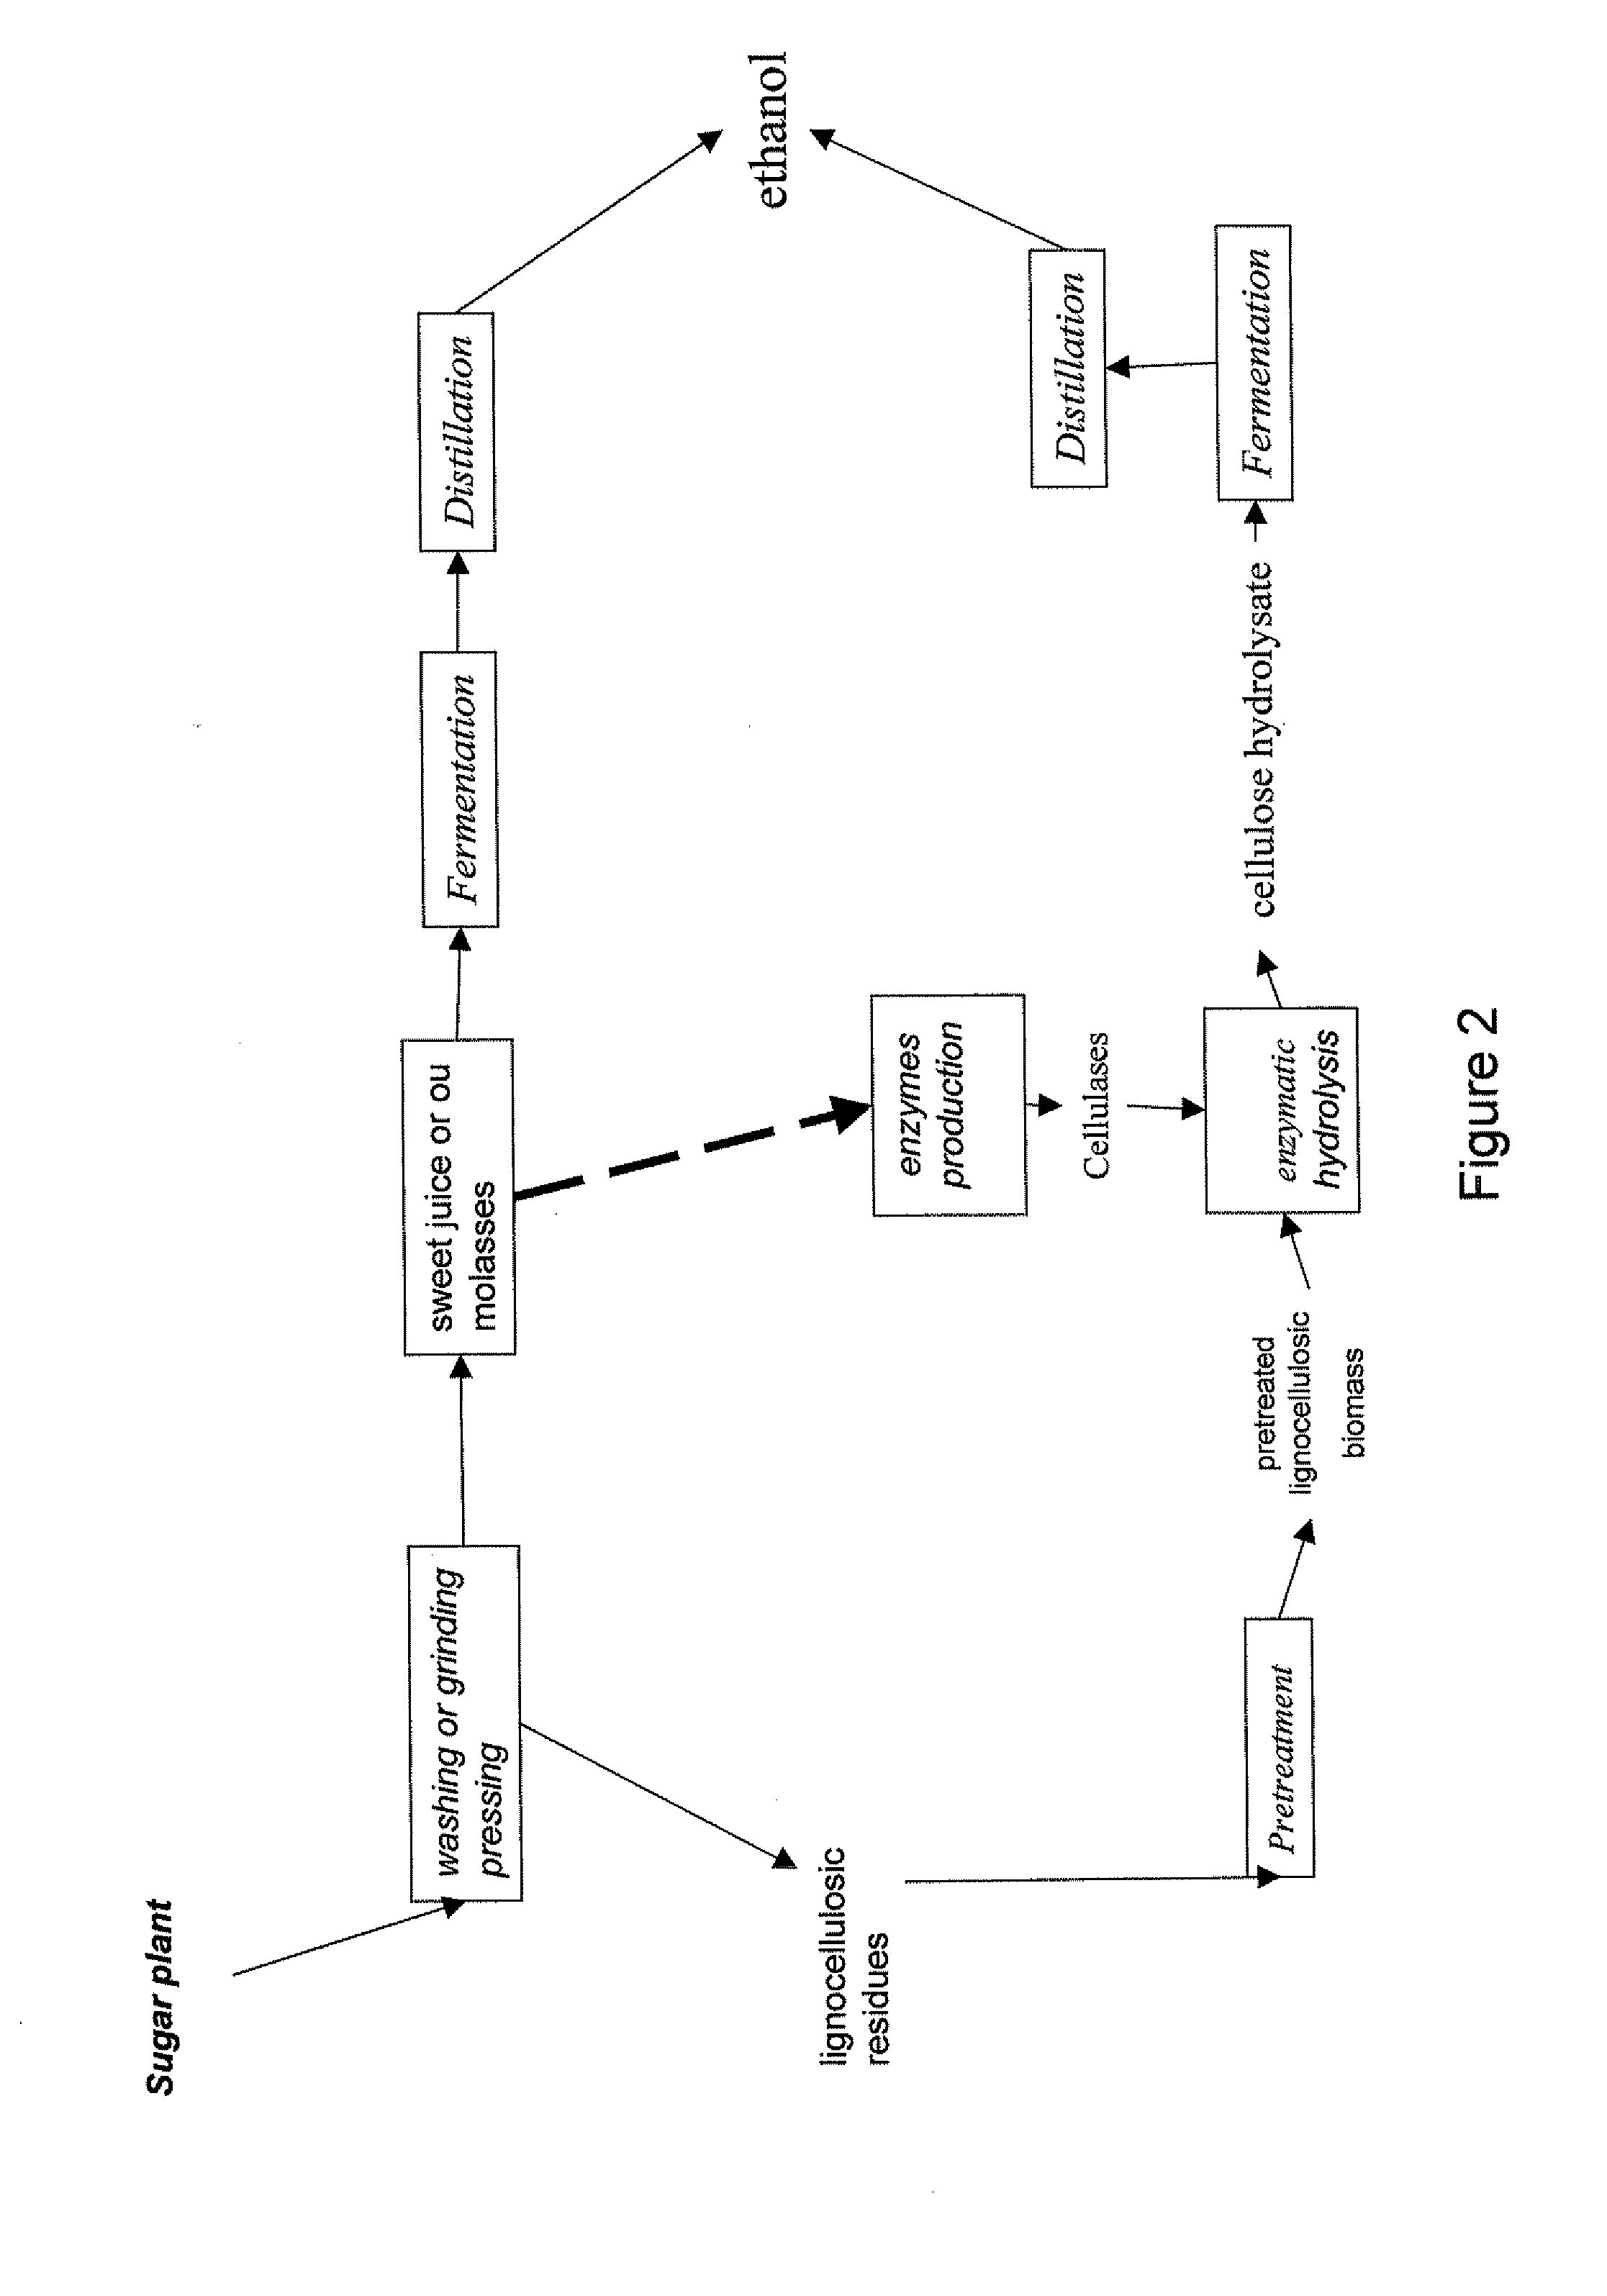 Method of producing alcohol in the biorefinery context